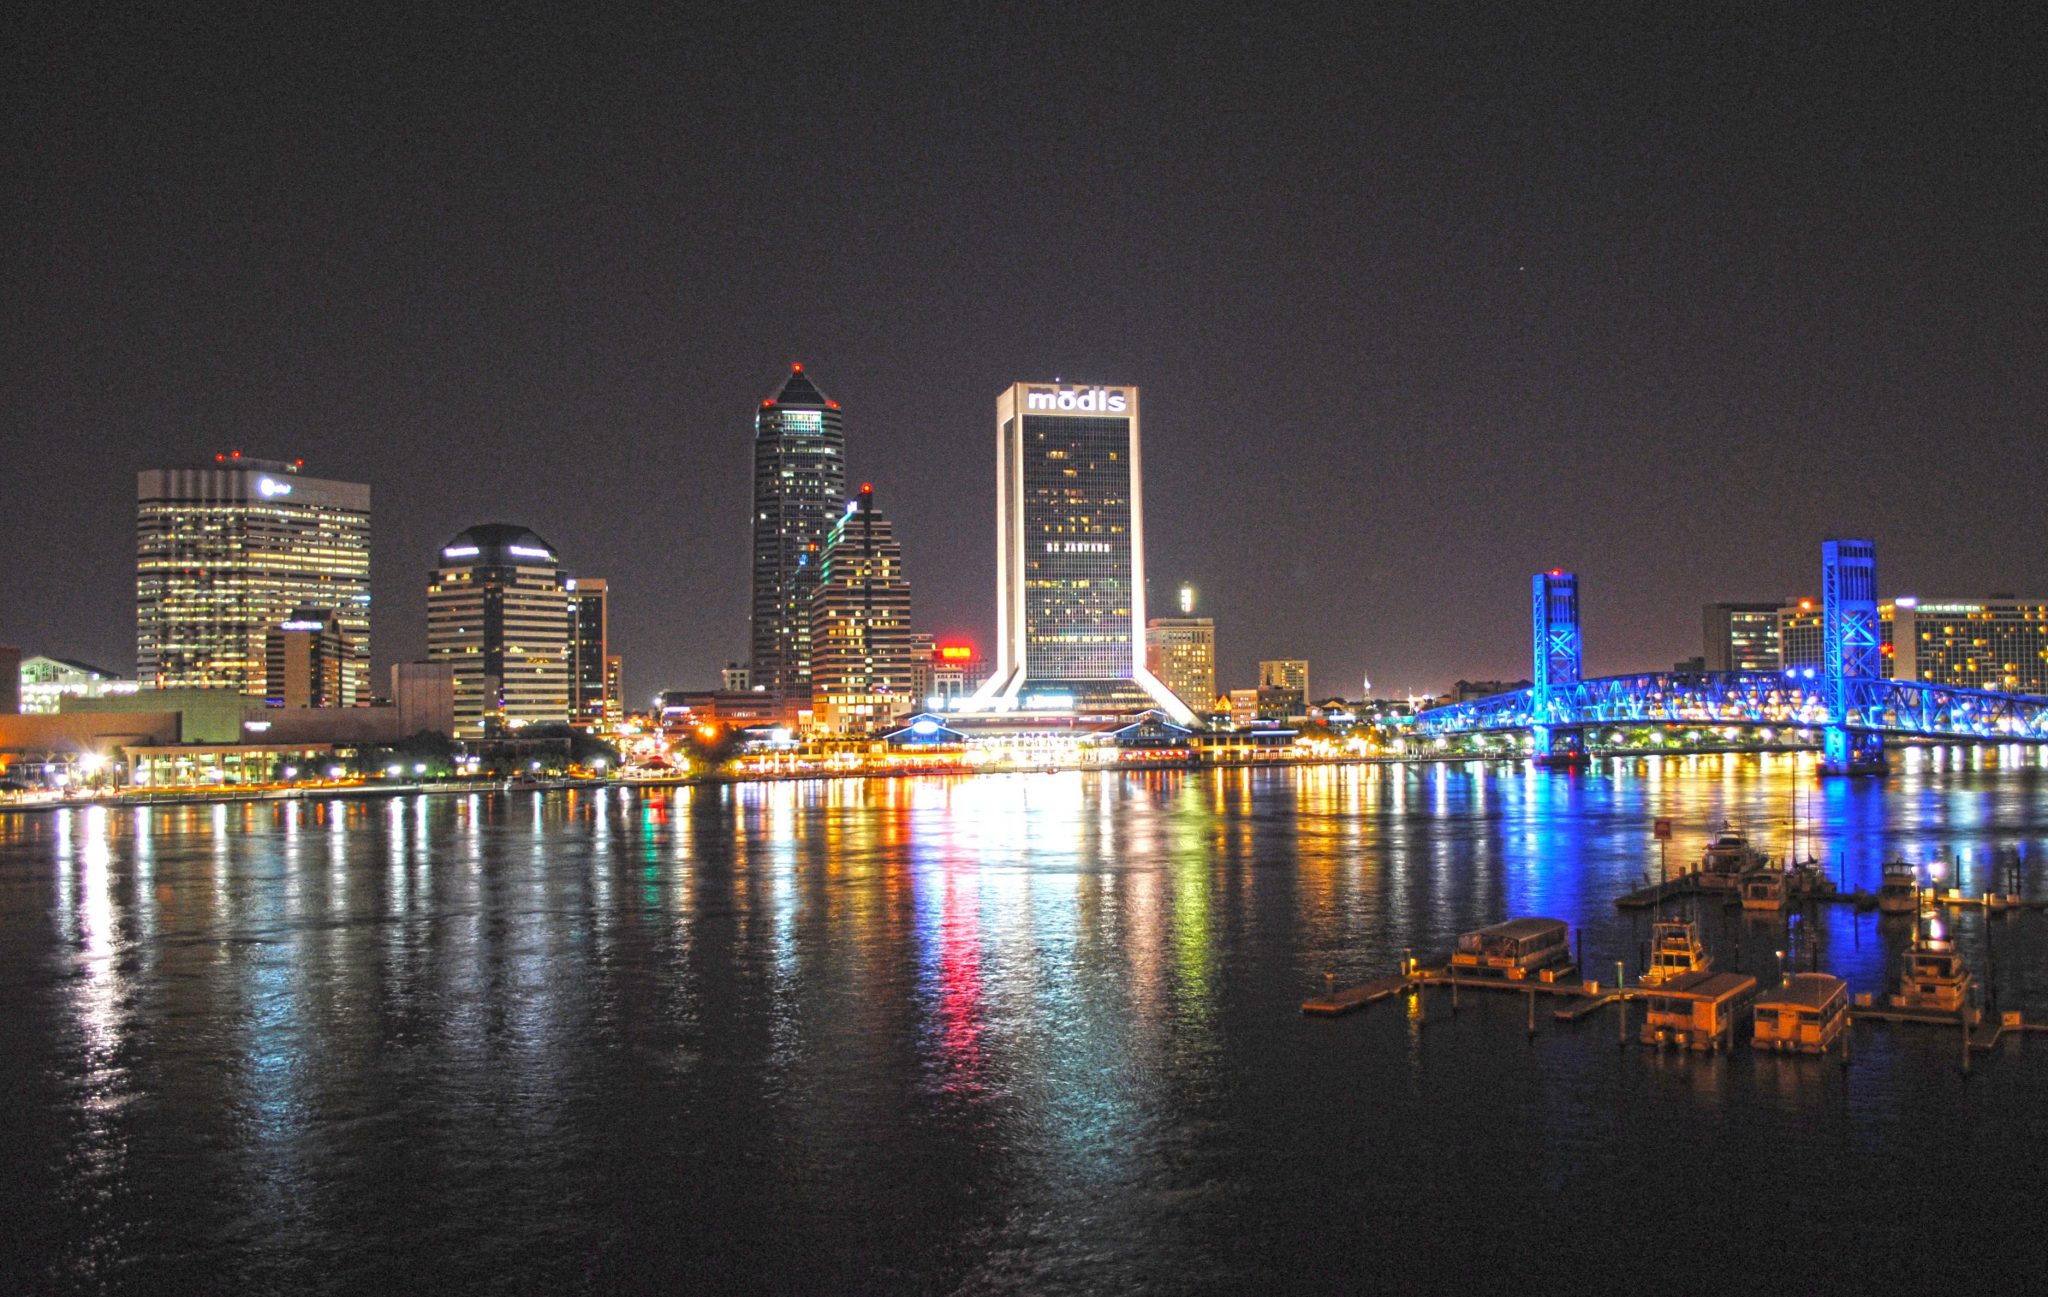 All About The City Of Jacksonville, Florida